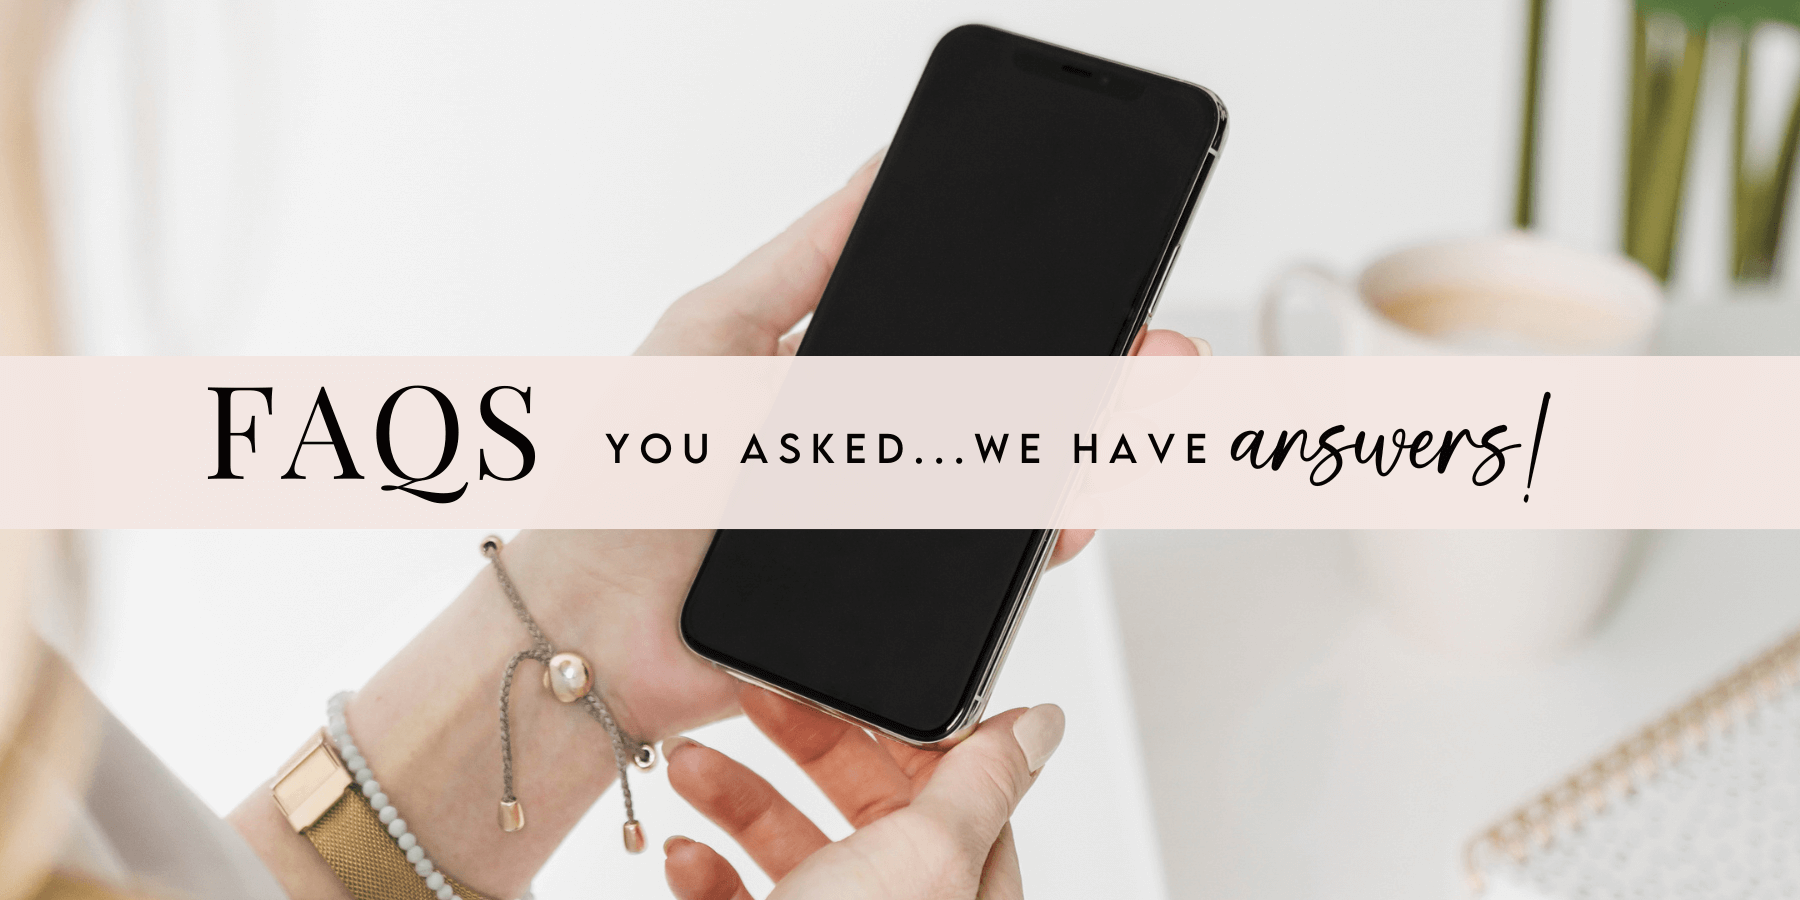 a woman holds and iphone with a blank screen. The text reads "FAQs: You asked...we have answers!"